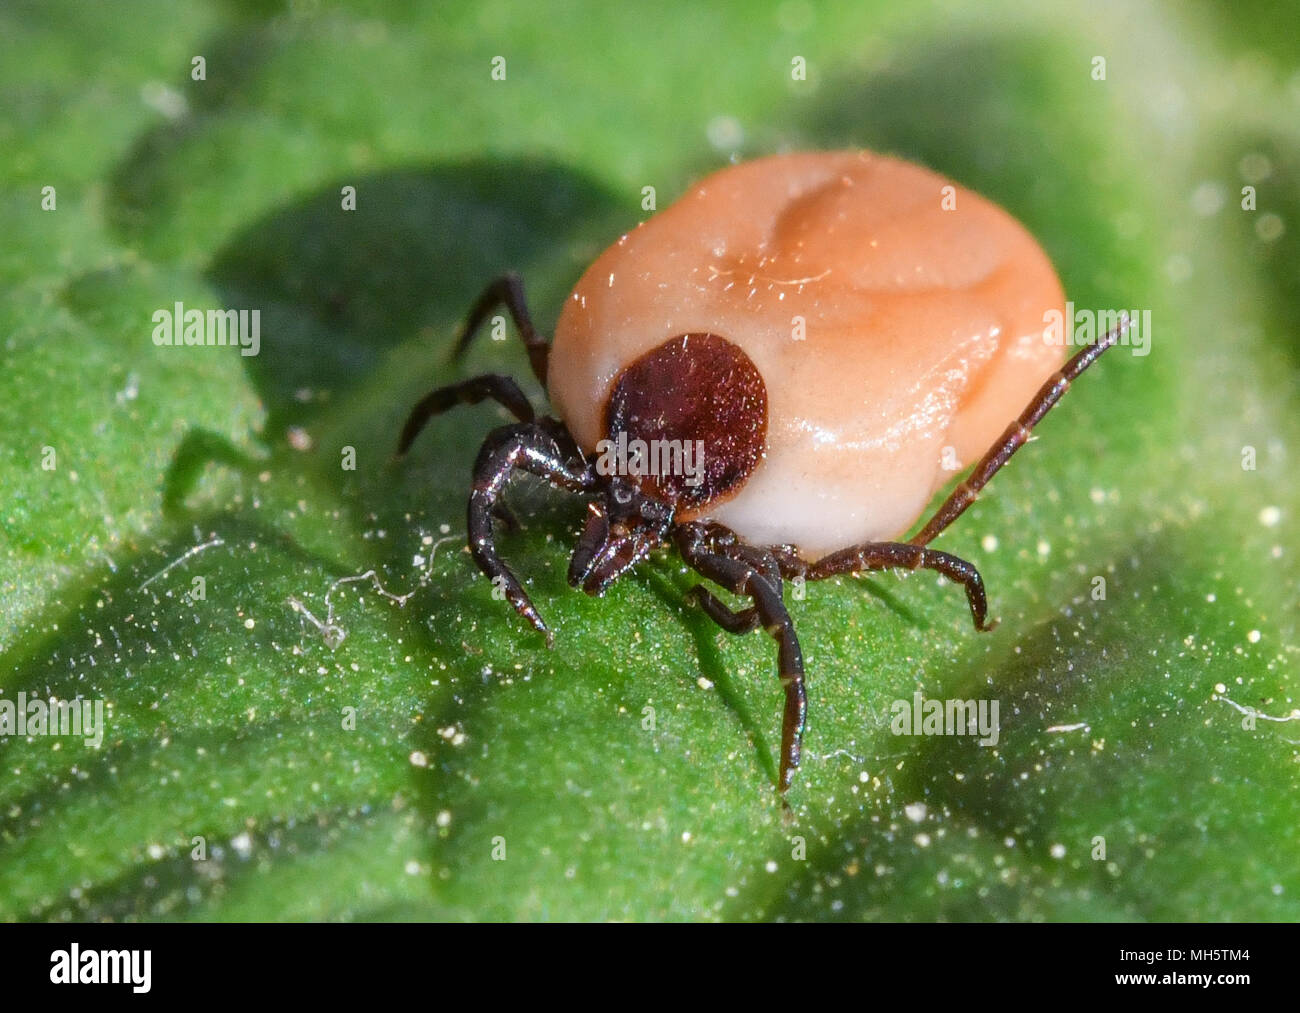 29 April 2018, Germany, Sieversdorf: A saturated tick crawls up a leaf. Ticks, which normally lurk in the meadows, love temperatures above 7°C and more than 80% of air humidity. They prefer warm and humid spaces, finding their habitat to be typically in the forest. Tick bites can cause borreliosis, leading to hinge, heart and nerve infections. Photo: Patrick Pleul/dpa-Zentralbild/ZB Stock Photo